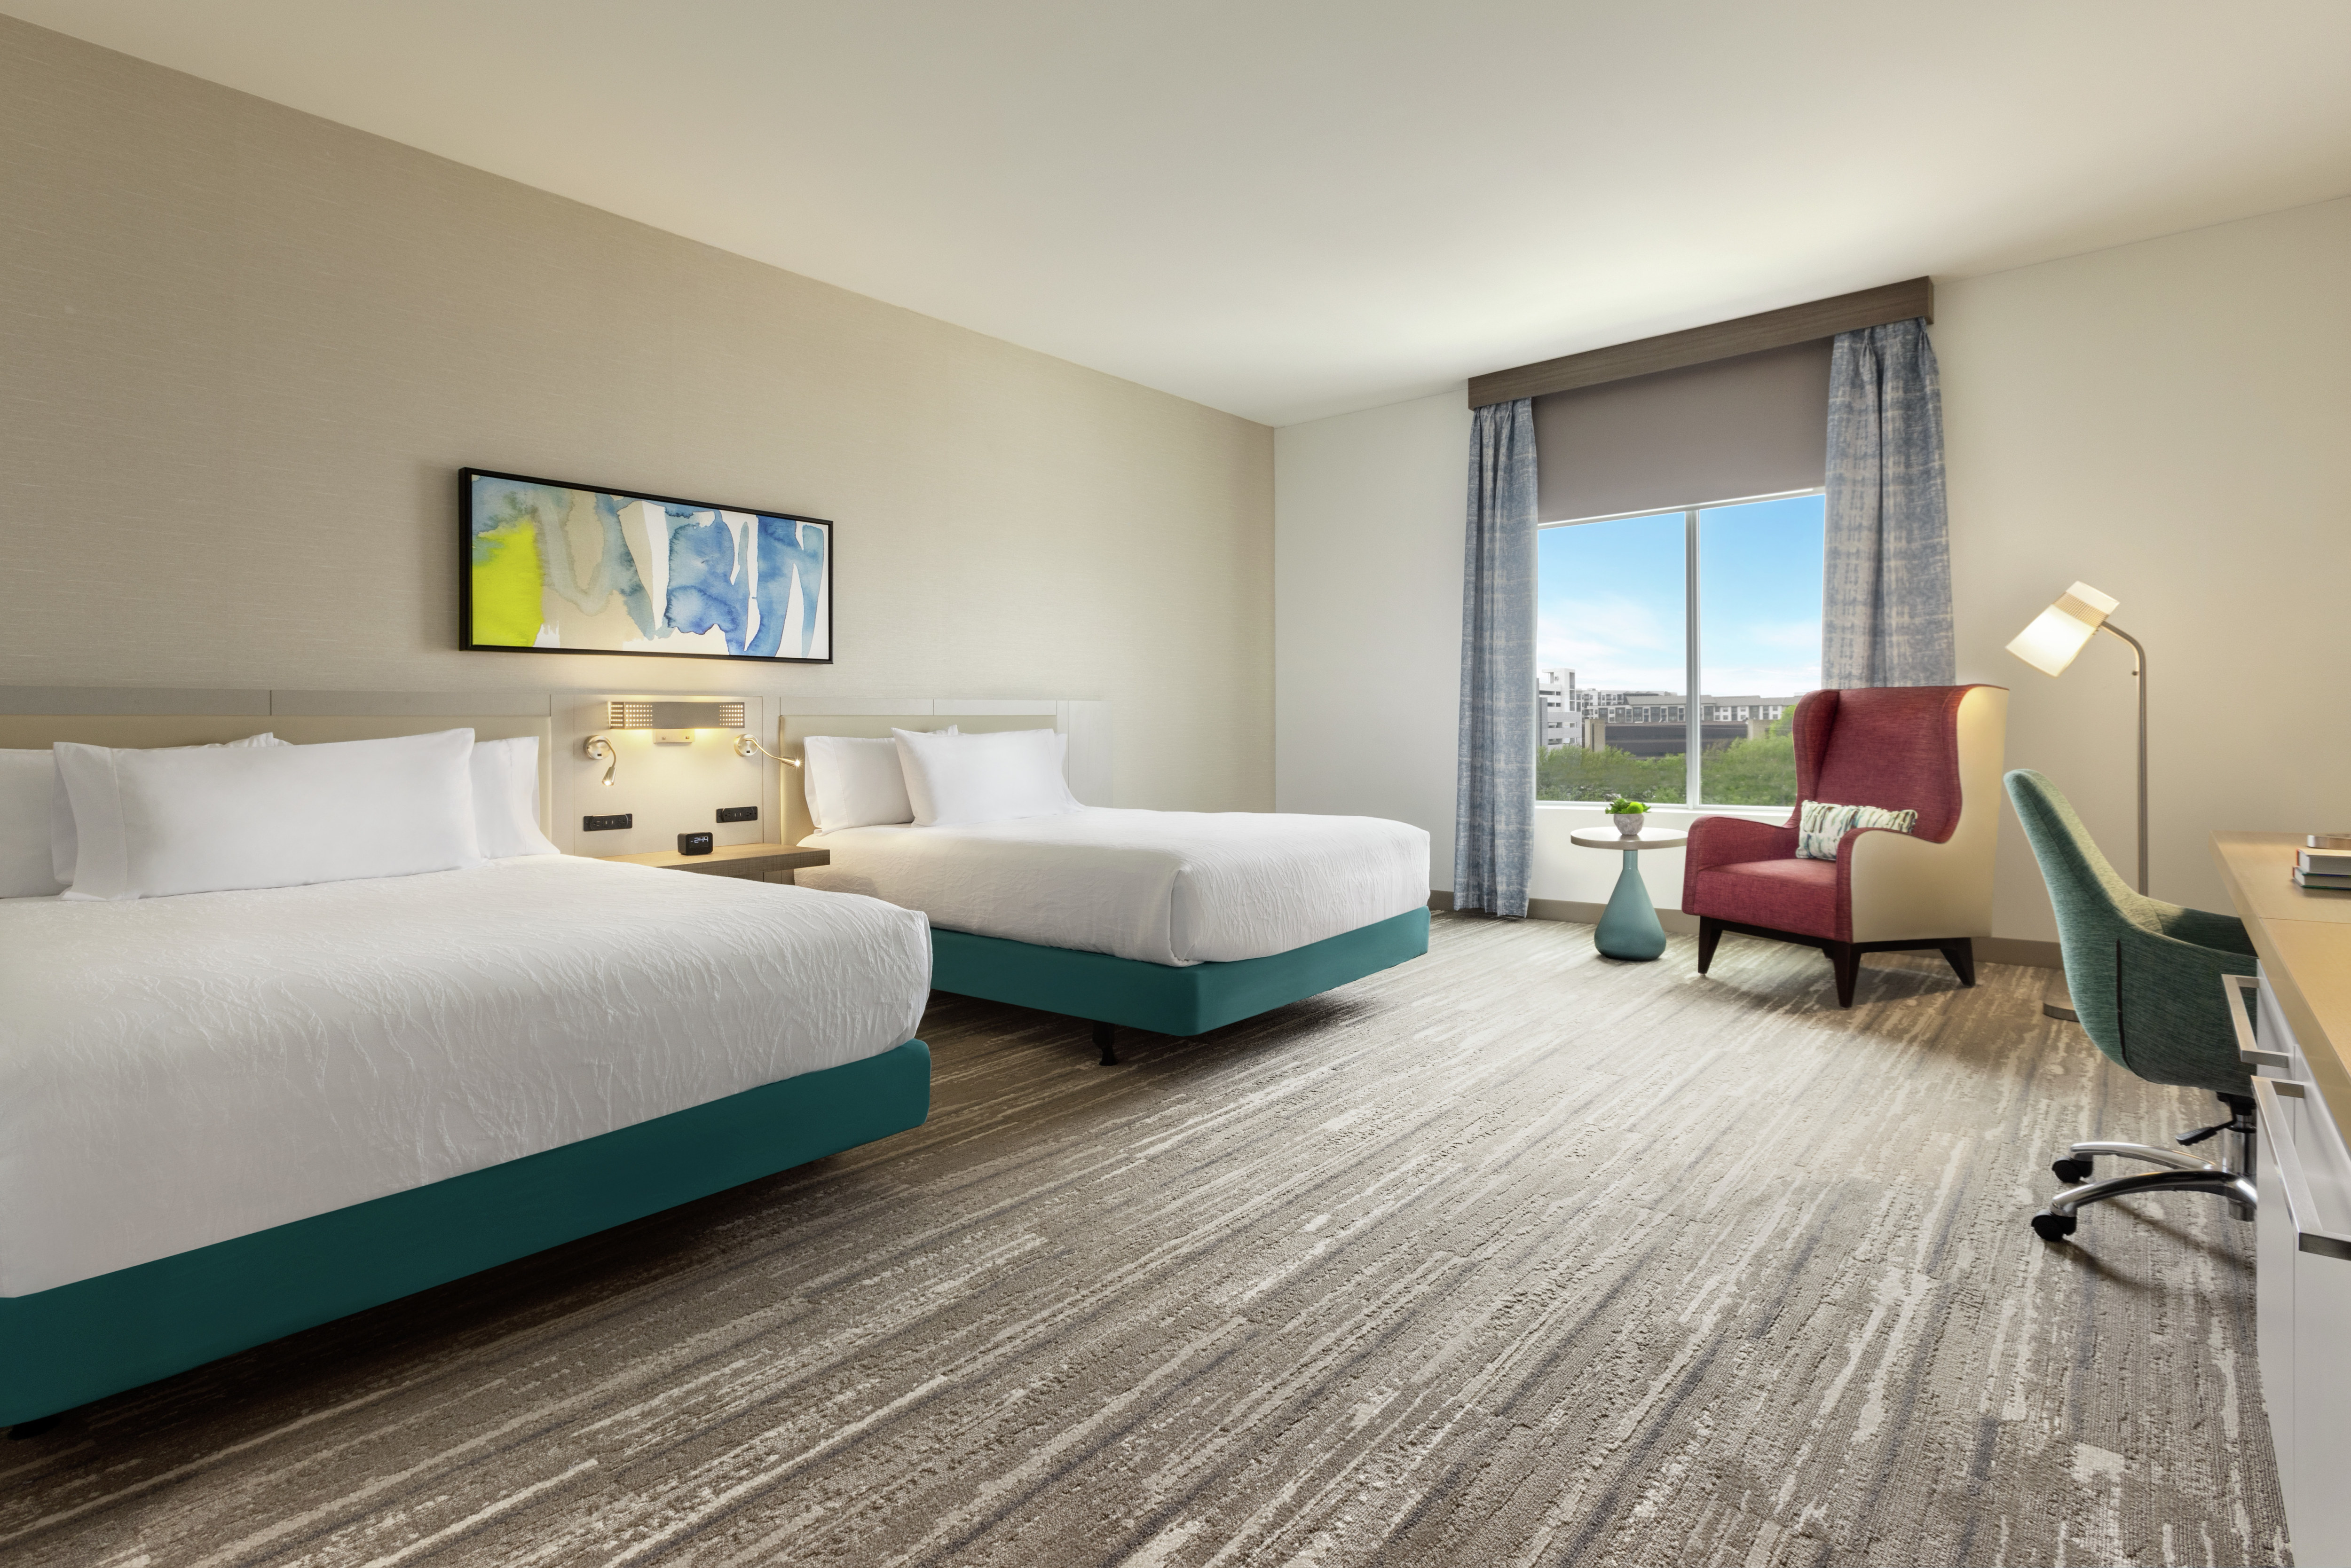 Spacious accessible guest room featuring two comfortable queen beds, work desk, and stunning outside view.